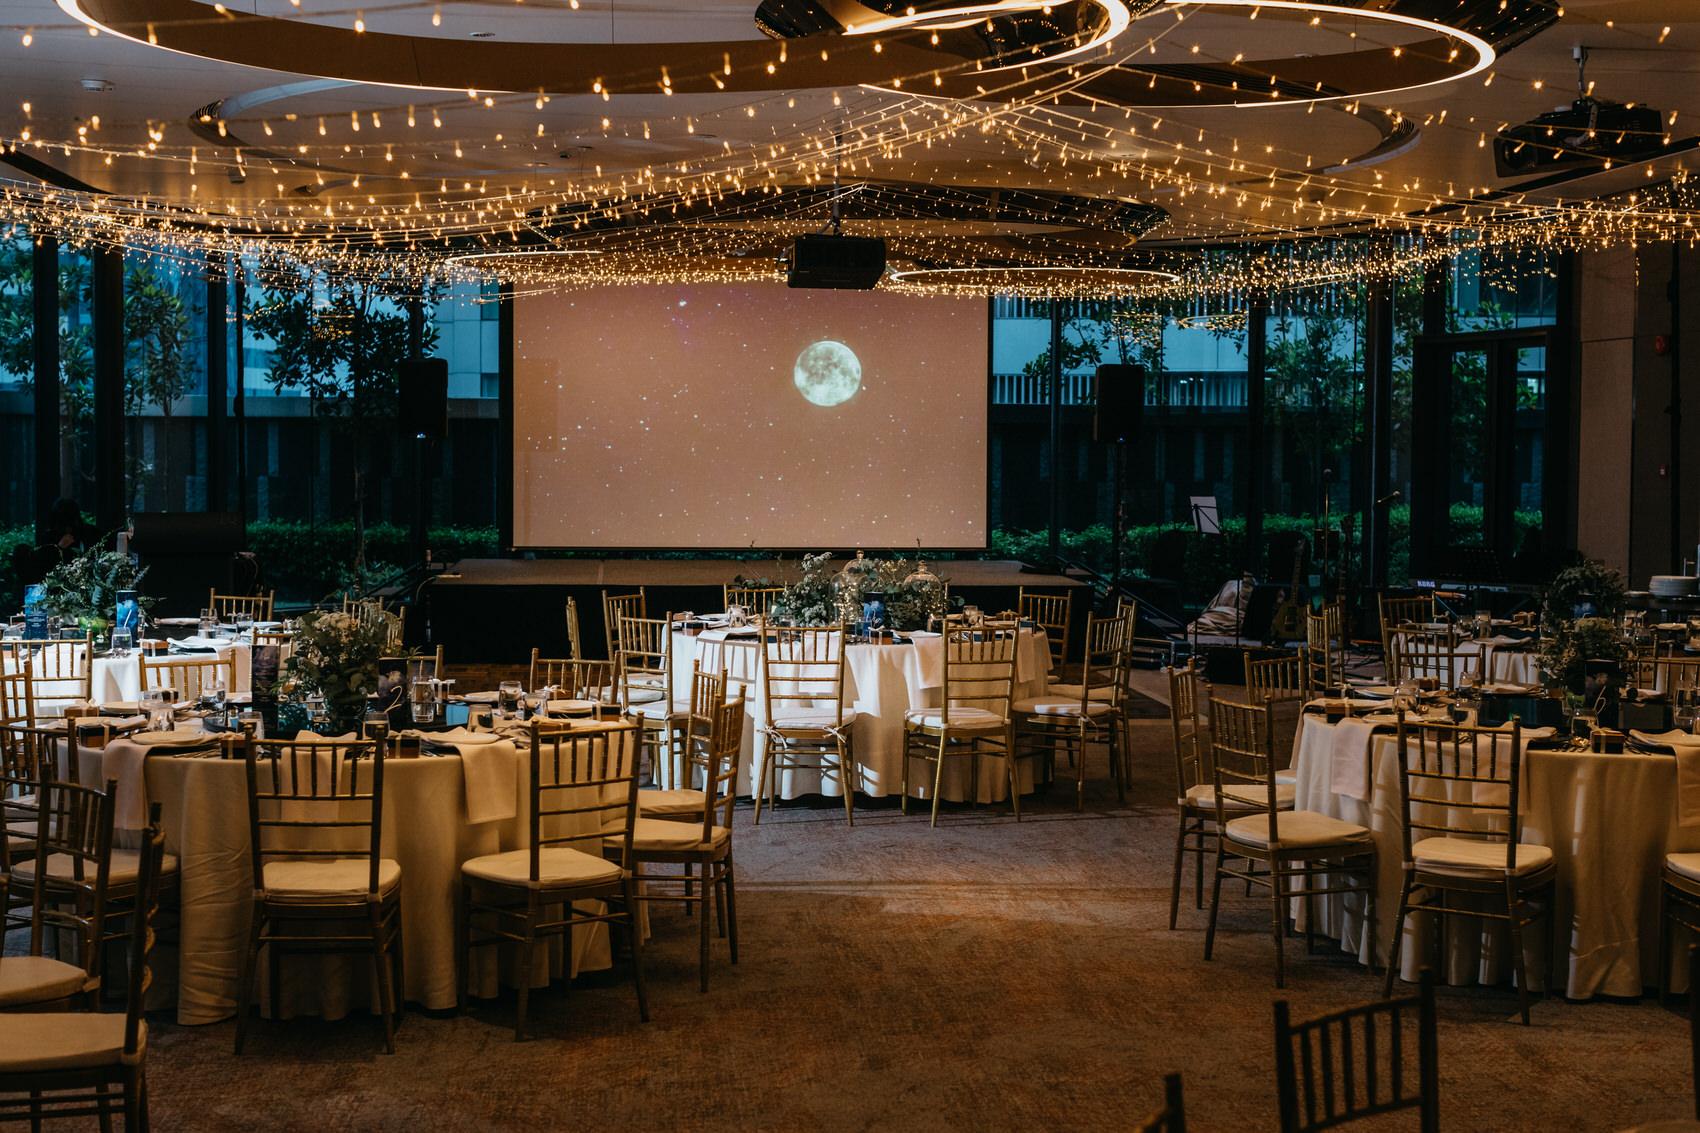 Moon-themed decor at the conservatory of The Equatorial Hotel Kuala Lumpur by Cliff Choong Photography